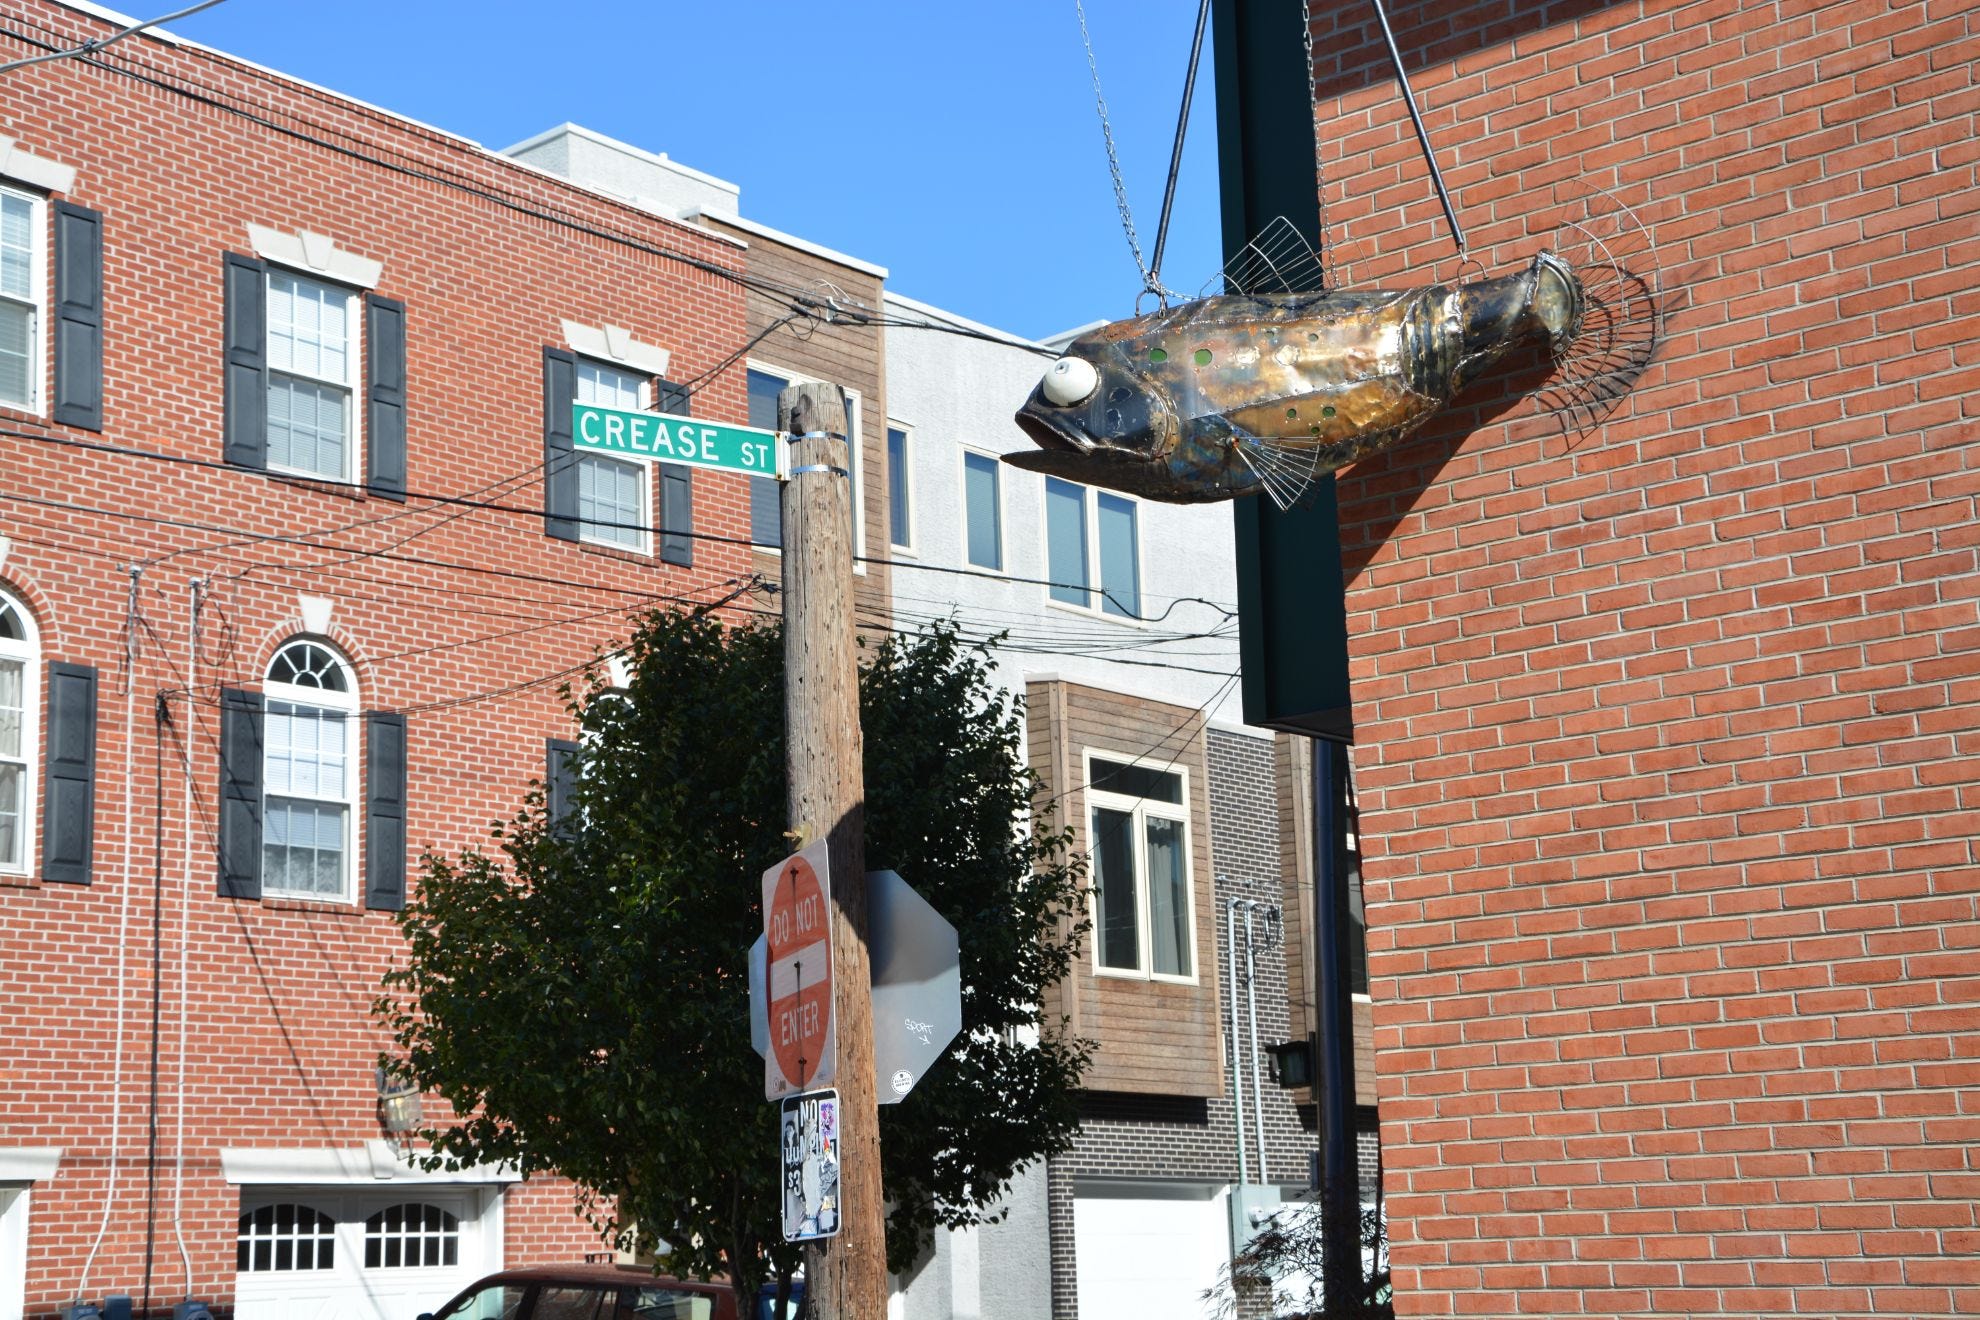 There are some fish decorations on the streets, but fewer than you
might think.